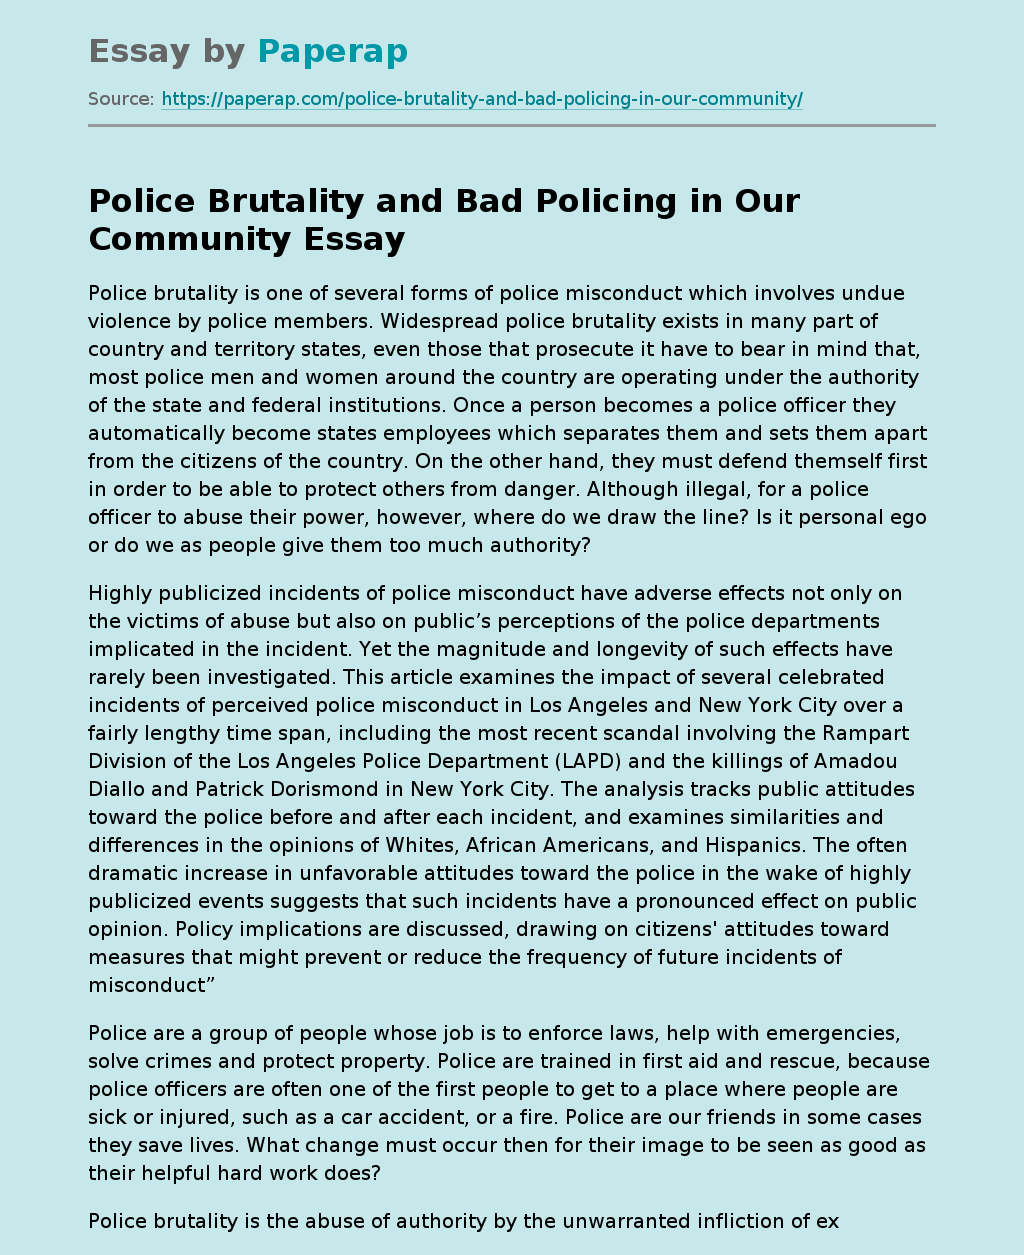 Police Brutality and Bad Policing in Our Community